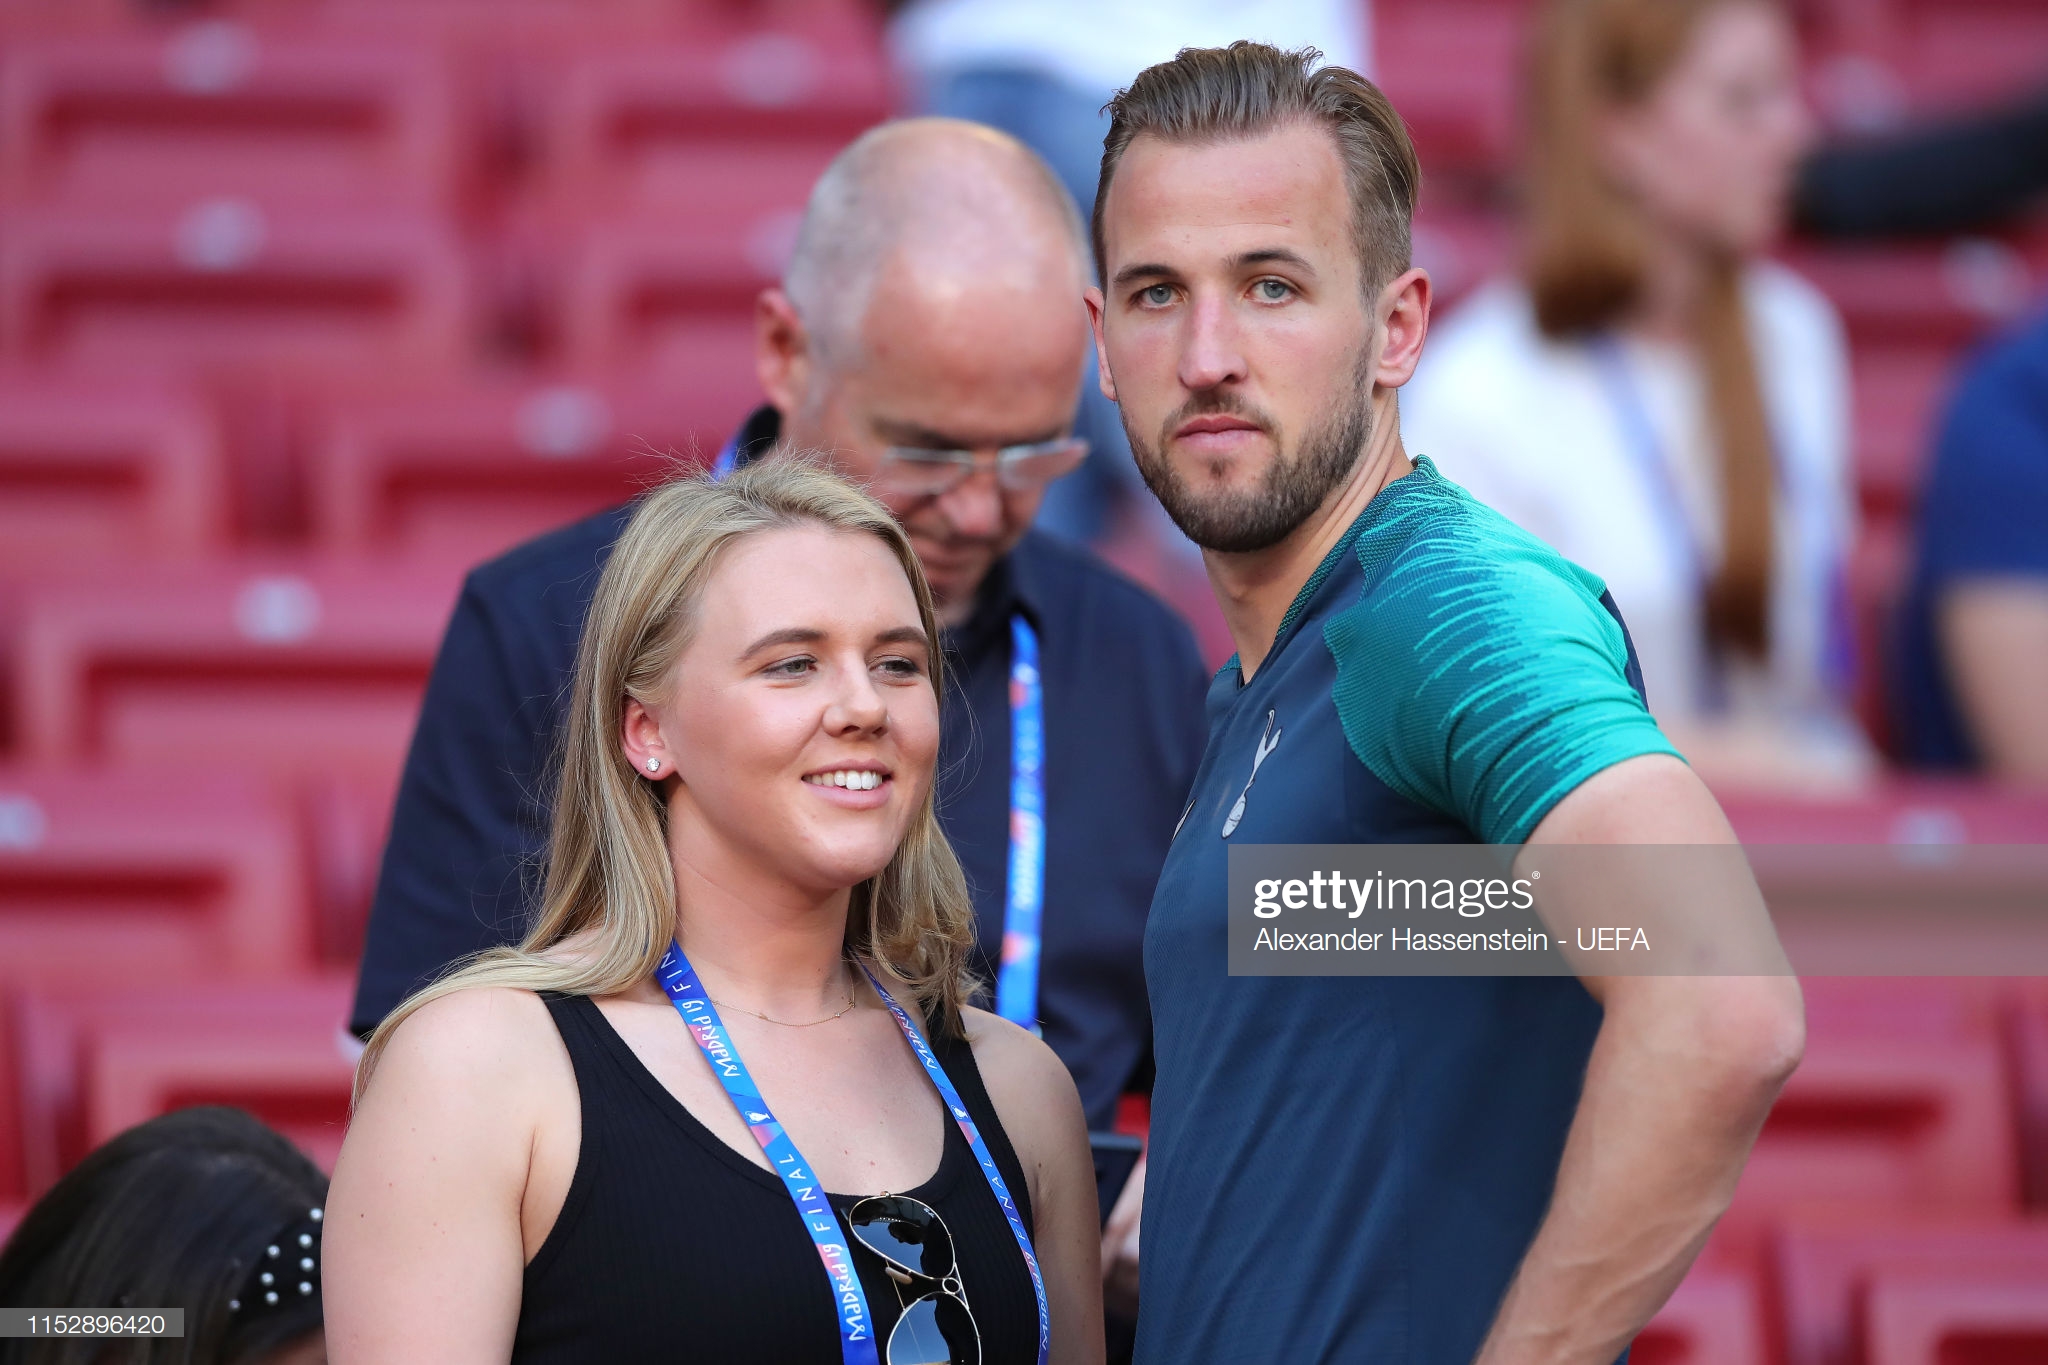 gettyimages-1152896420-2048x2048.jpg